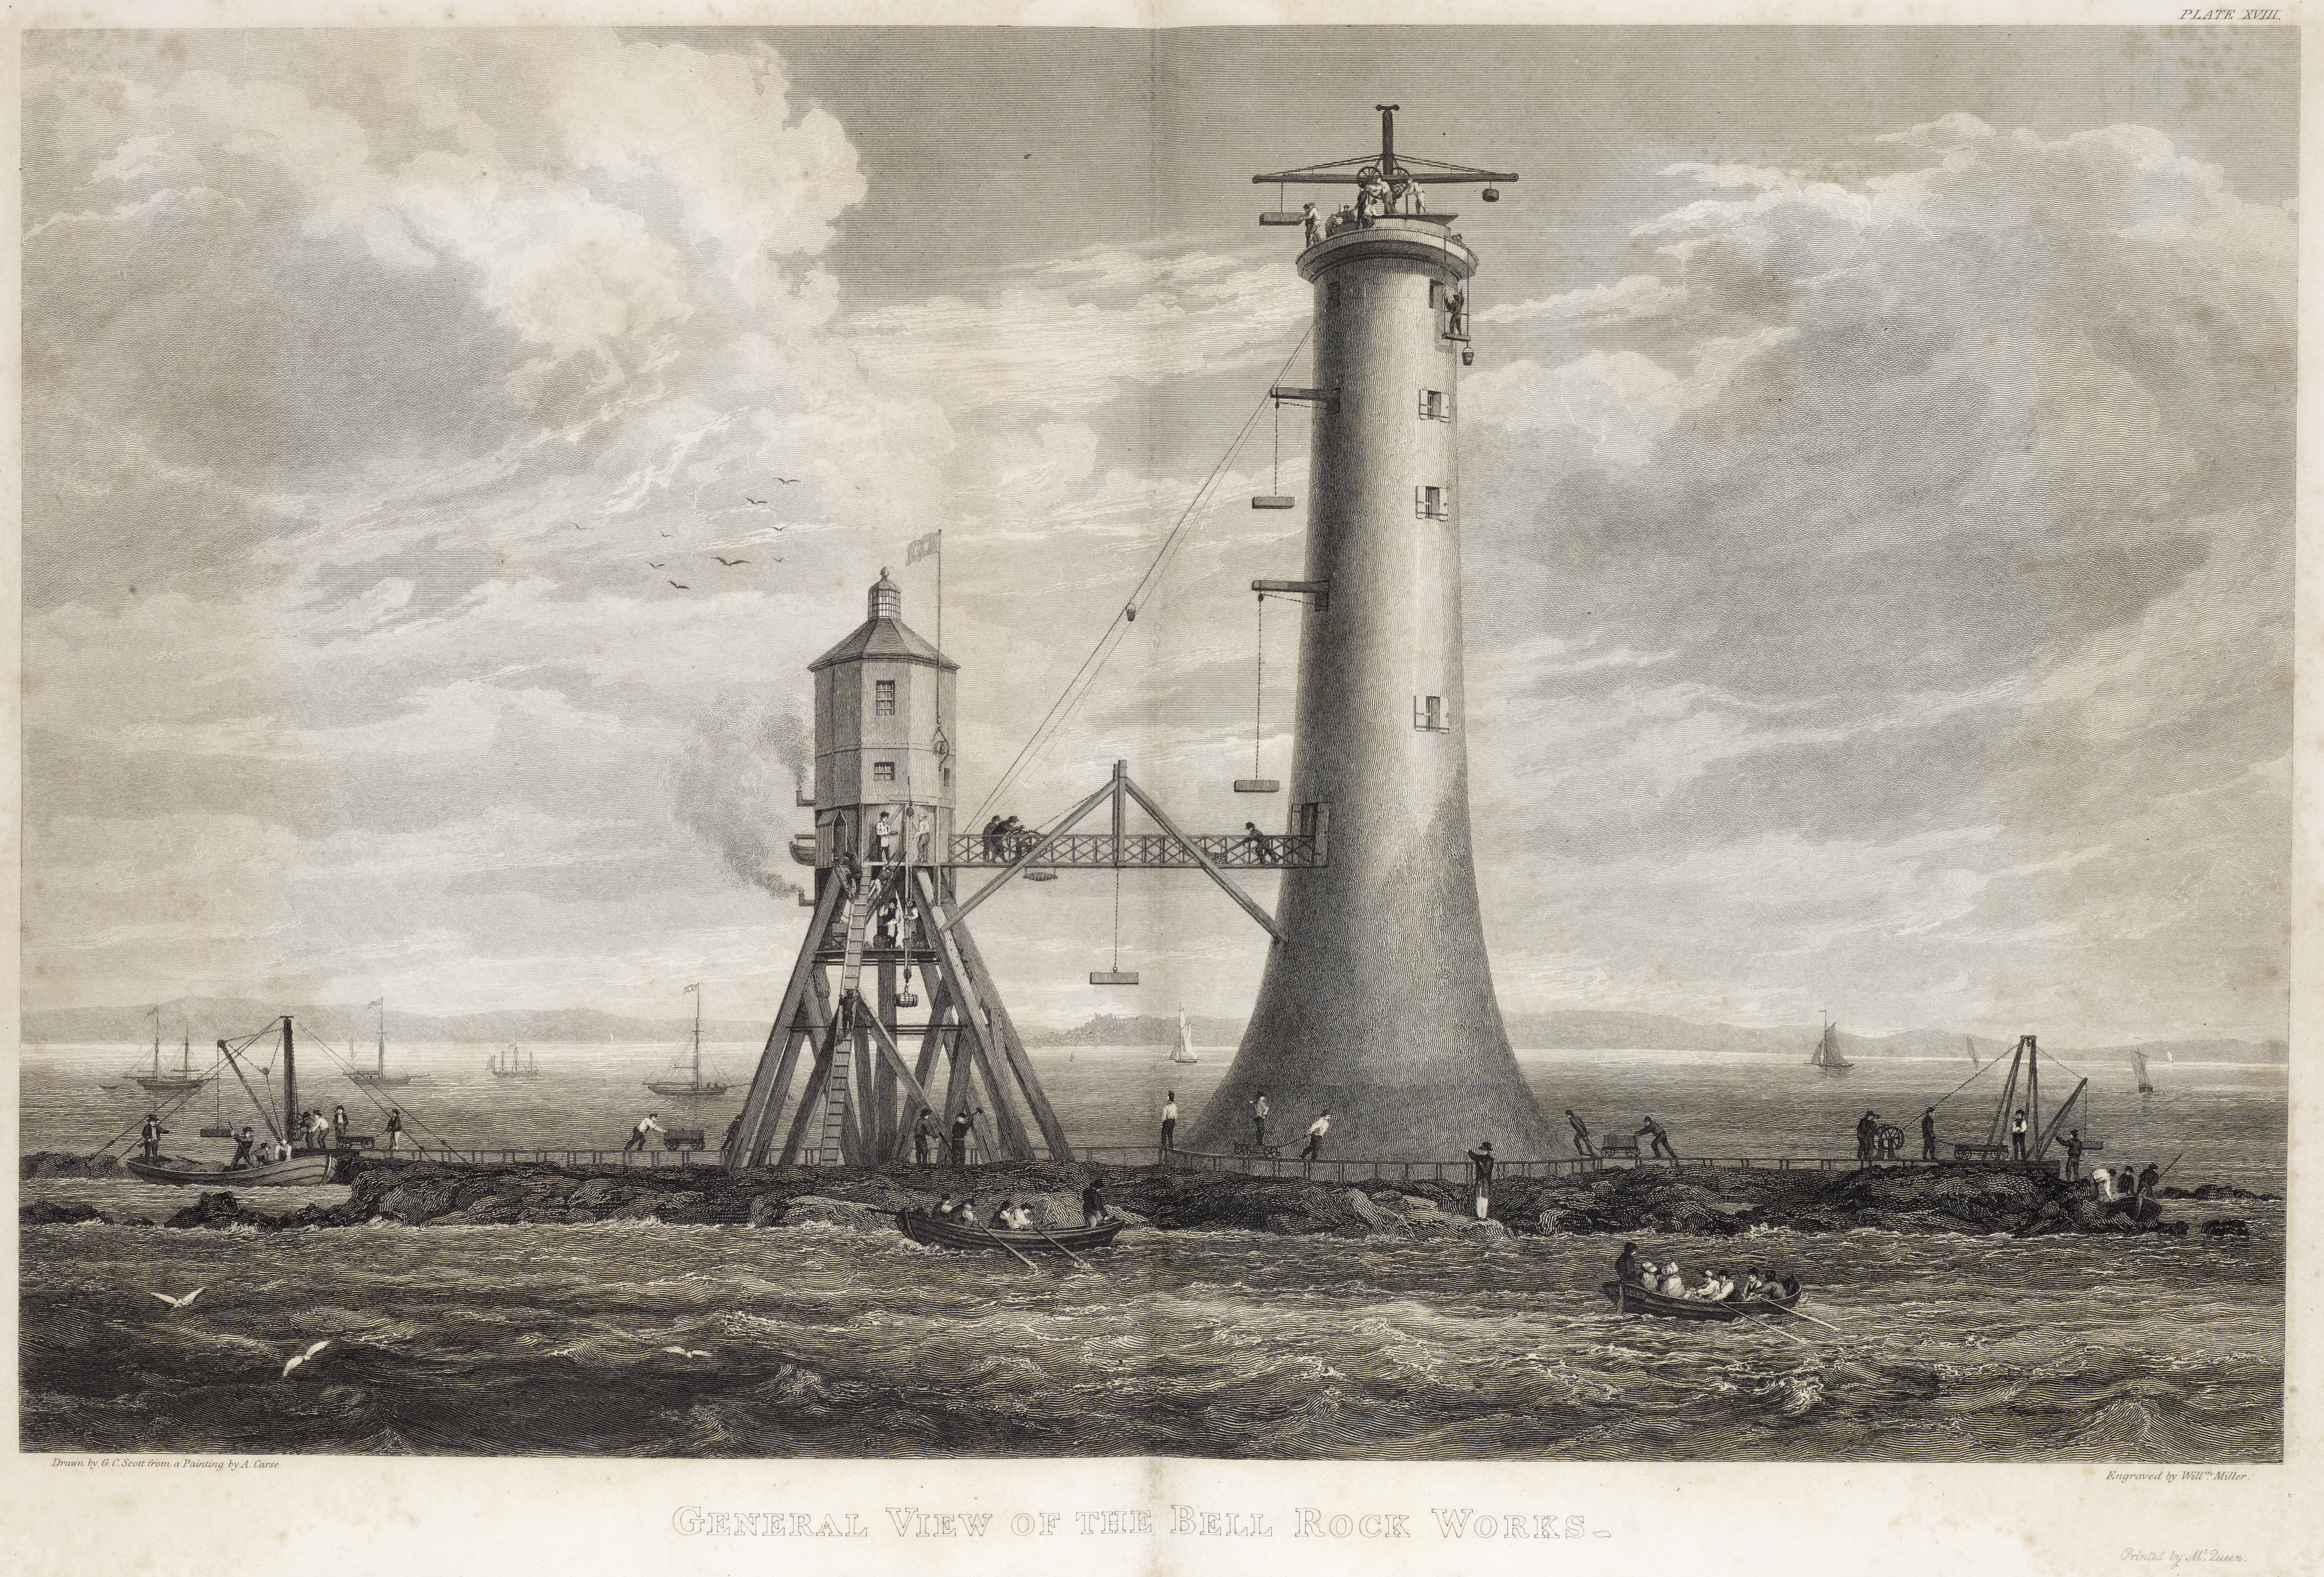 An illustration of the Bell Rock Lighthouse being built